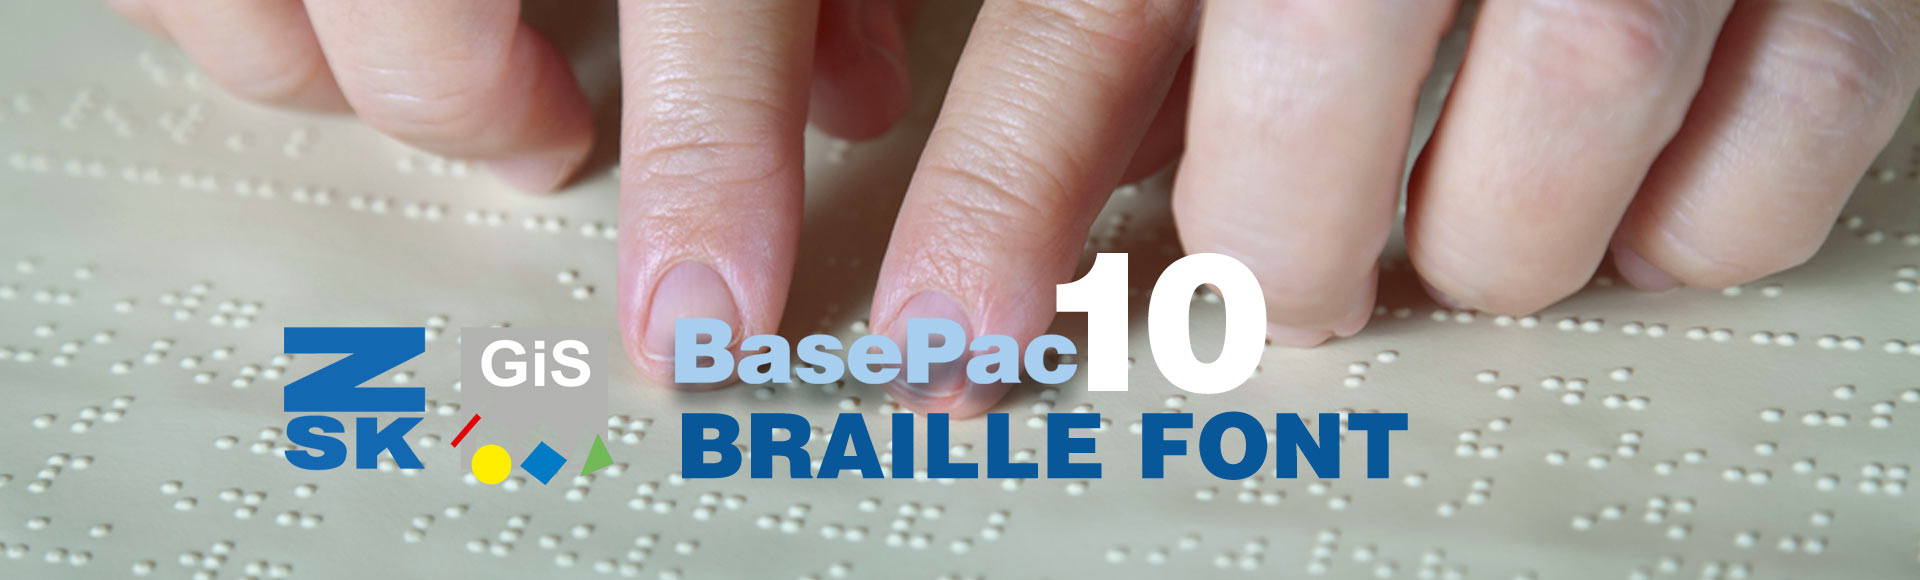 BasePac Option - Braille for the visually impaired